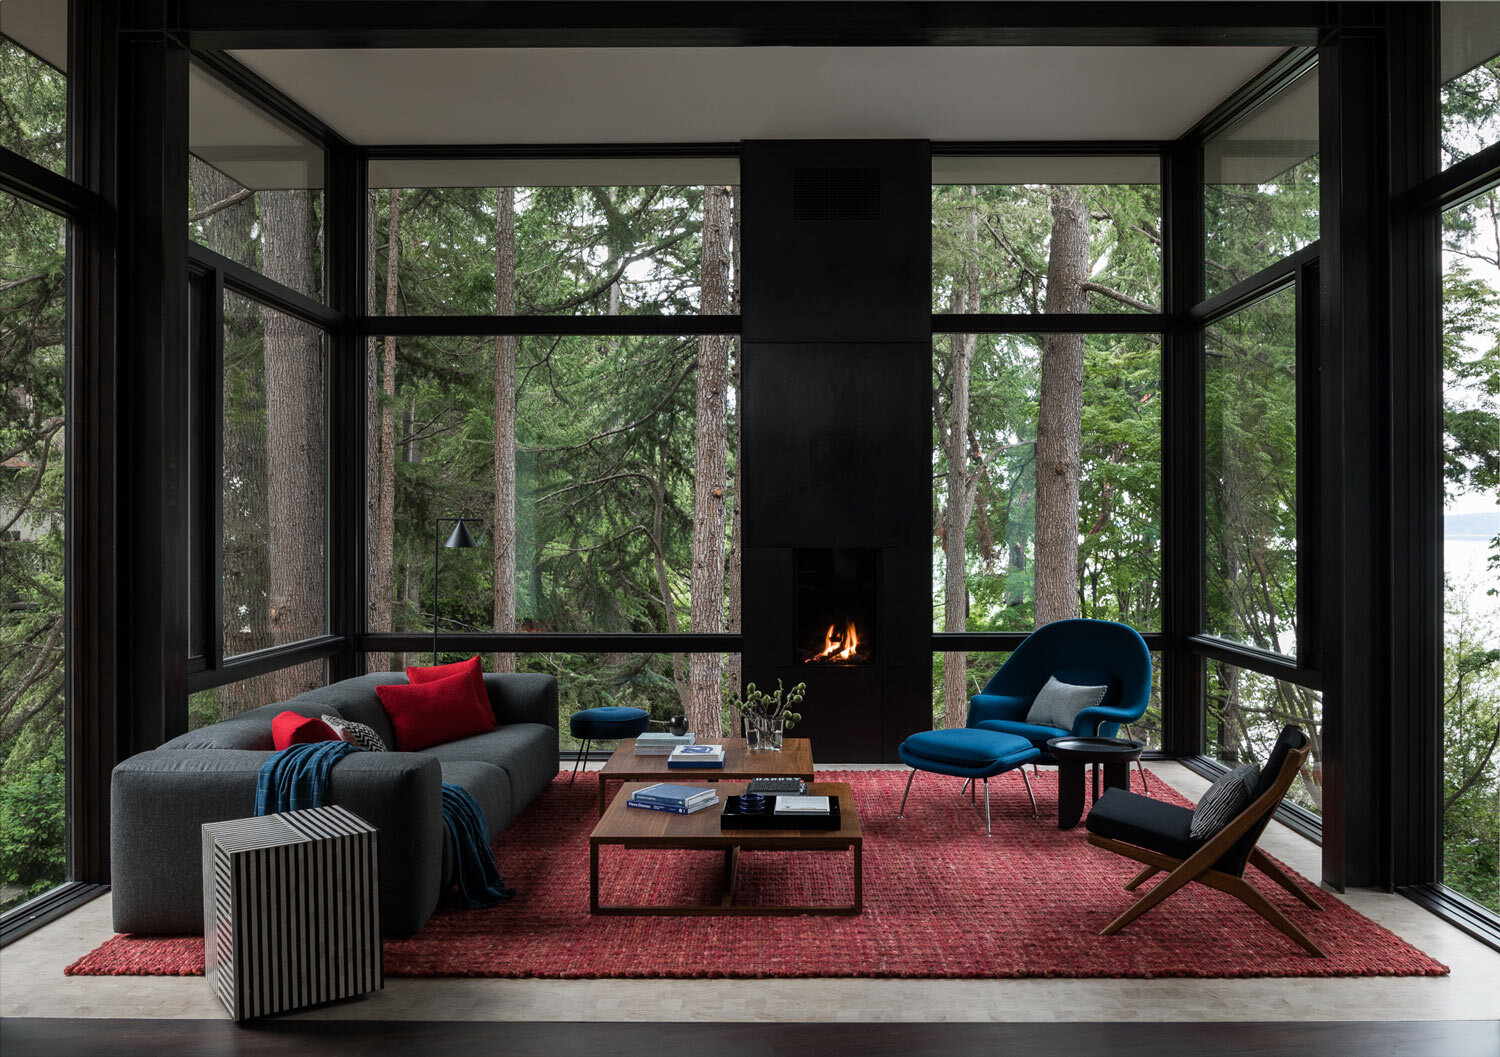 Tree House Fireplace by DeForest Architects - Modern residential design